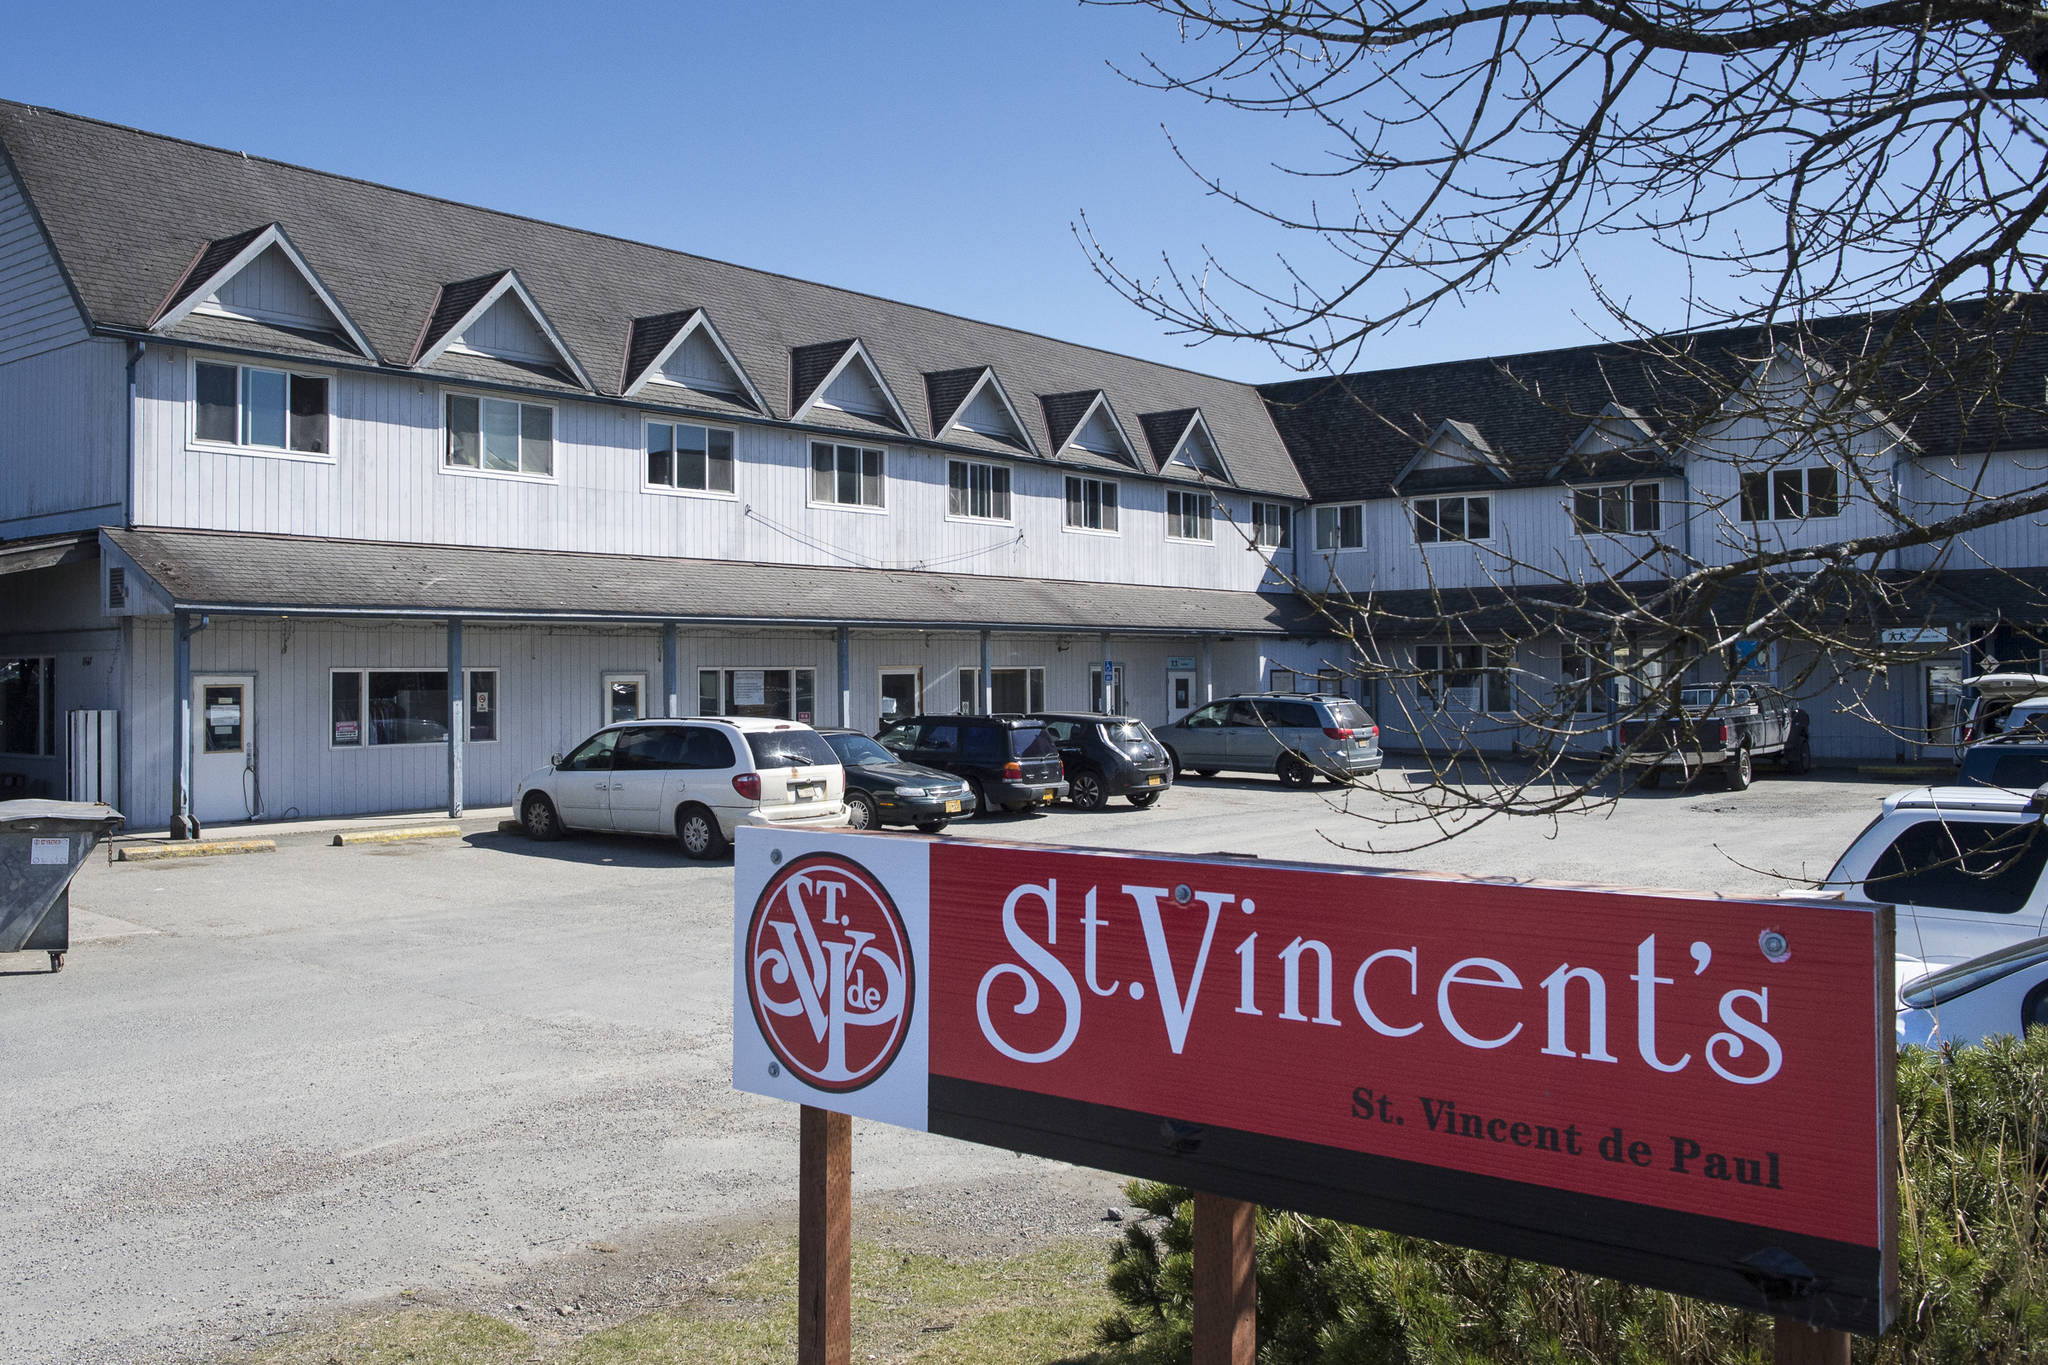 St. Vincent de Paul Society was awarded the contract to operate City and Borough of Juneau’s emergency warming shelter and plans to operate it a building located on Teal Street in the Mendenhall Valley. (Michael Penn | Juneau Empire File)